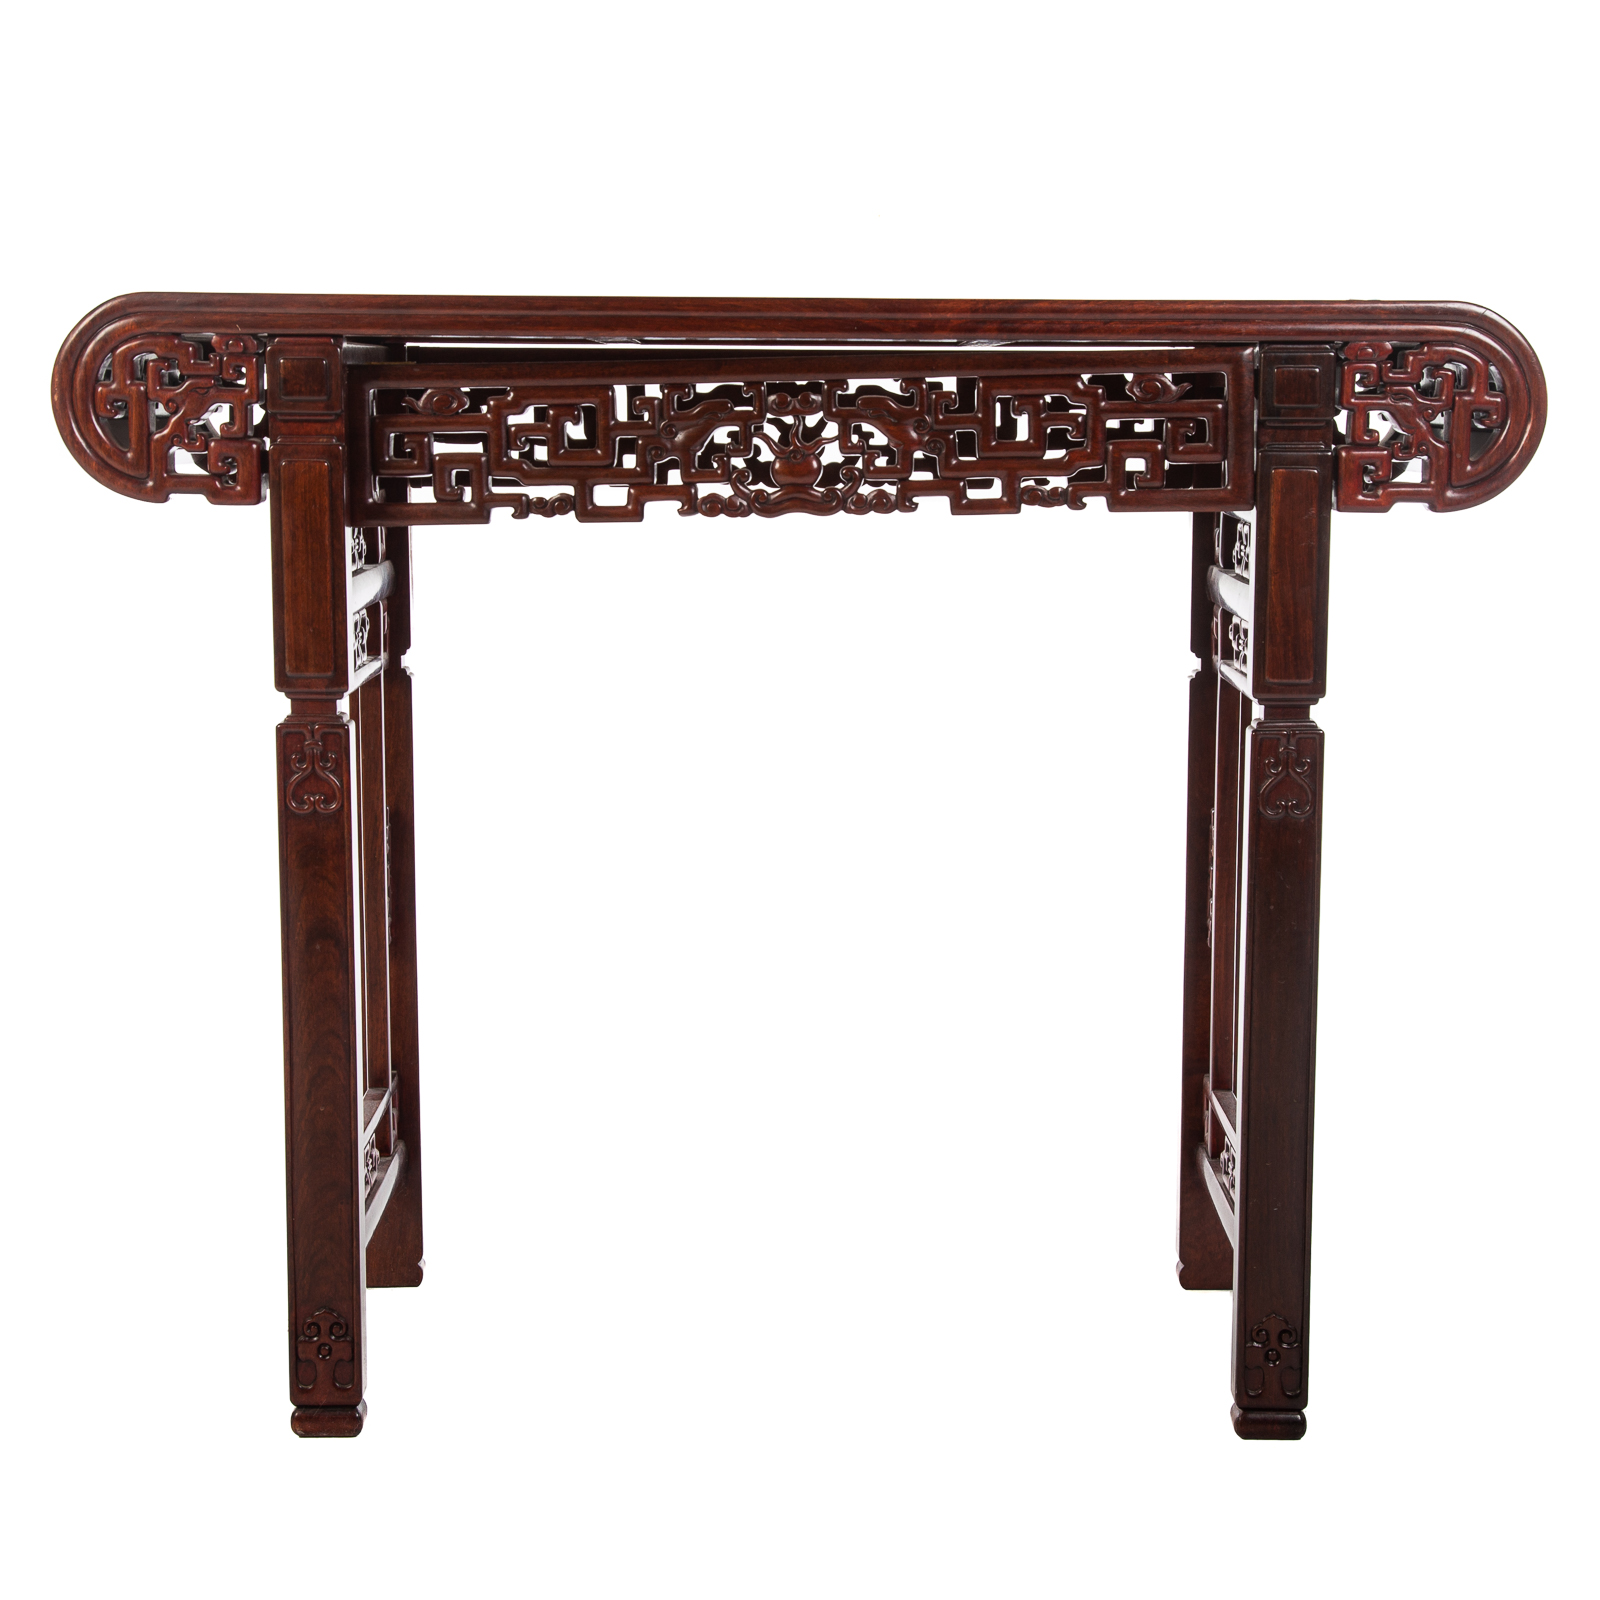 CHINESE CARVED HARDWOOD ALTAR TABLE